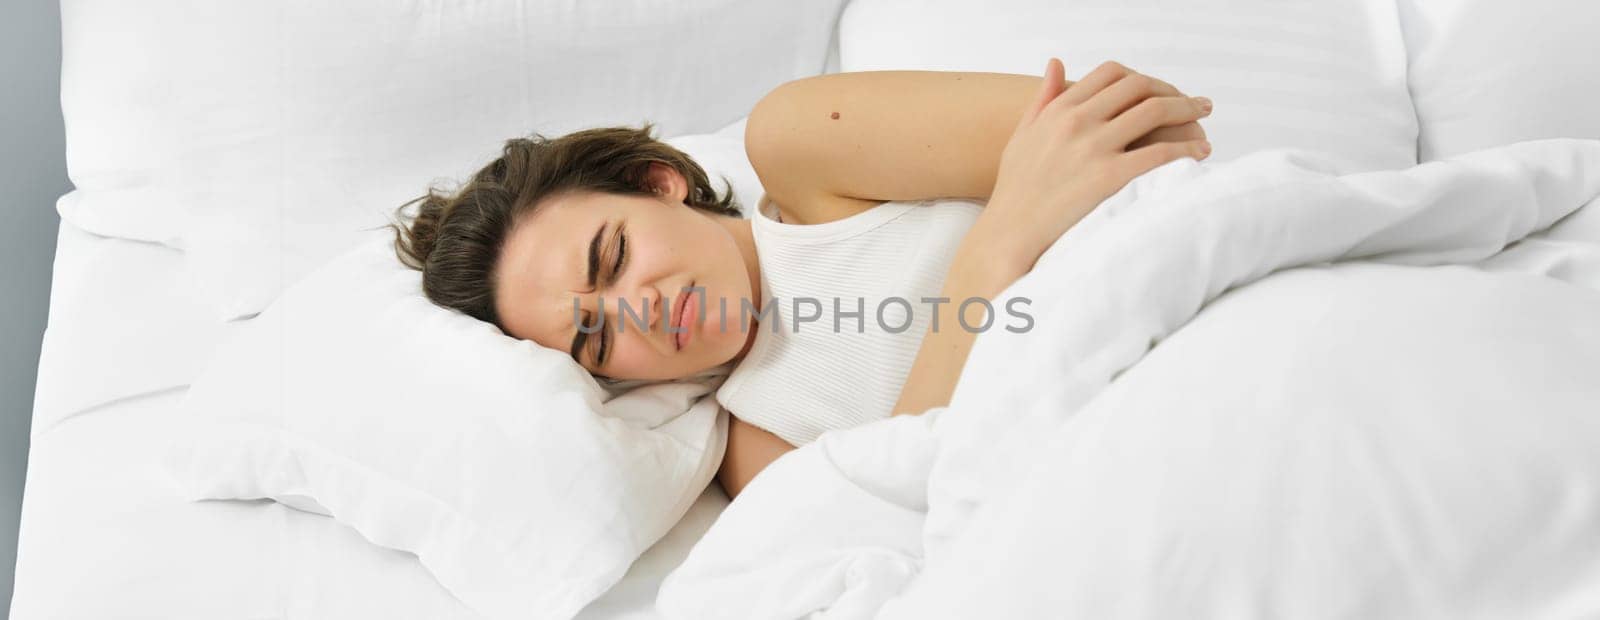 Young woman lying in bed with stomach ache, has painful cramps, menstrual pain. Lifestyle and wellbeing concept